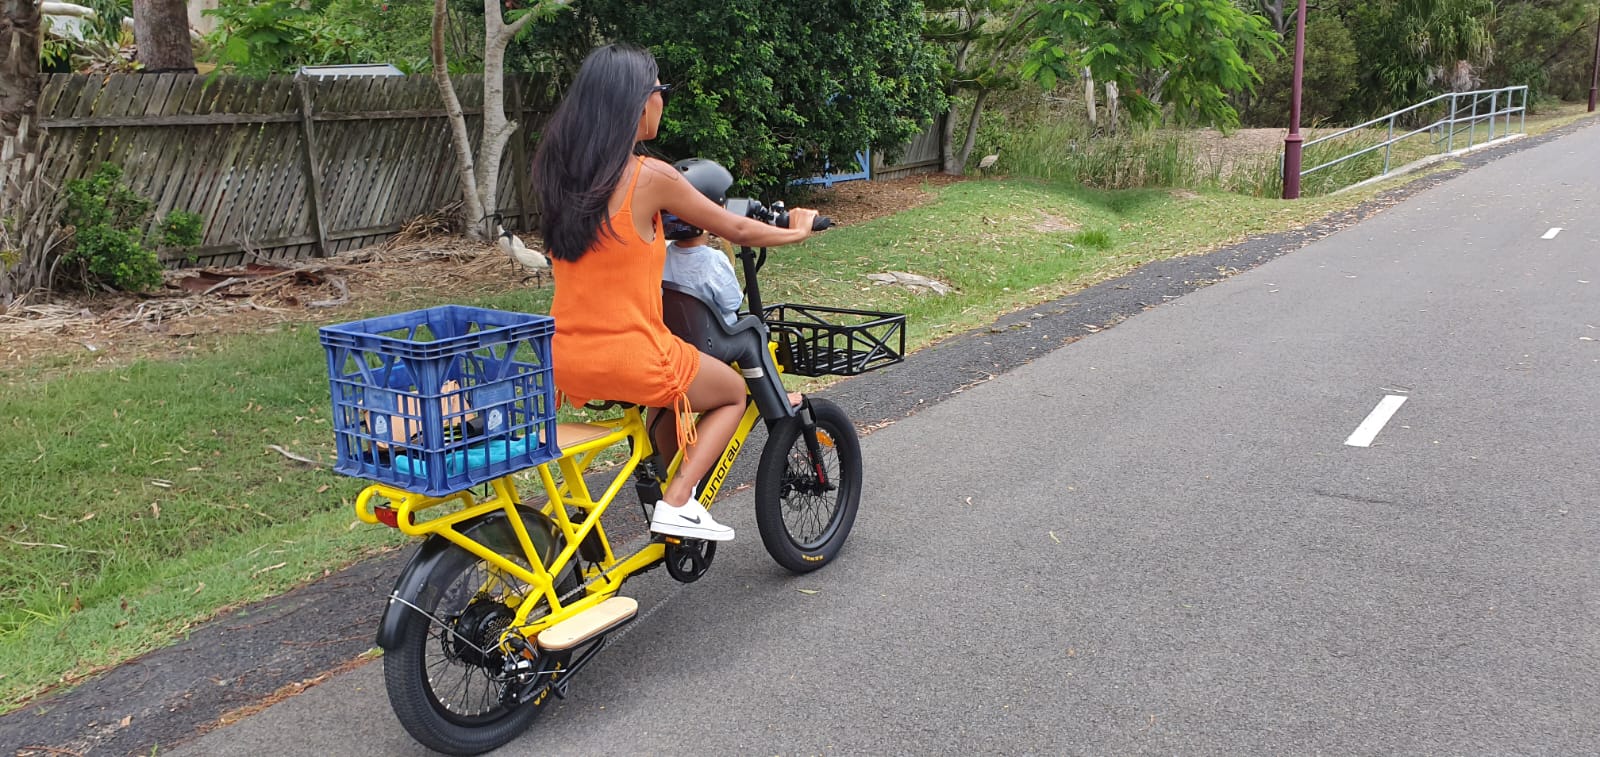 Can a Cargo ebike replace a second car?